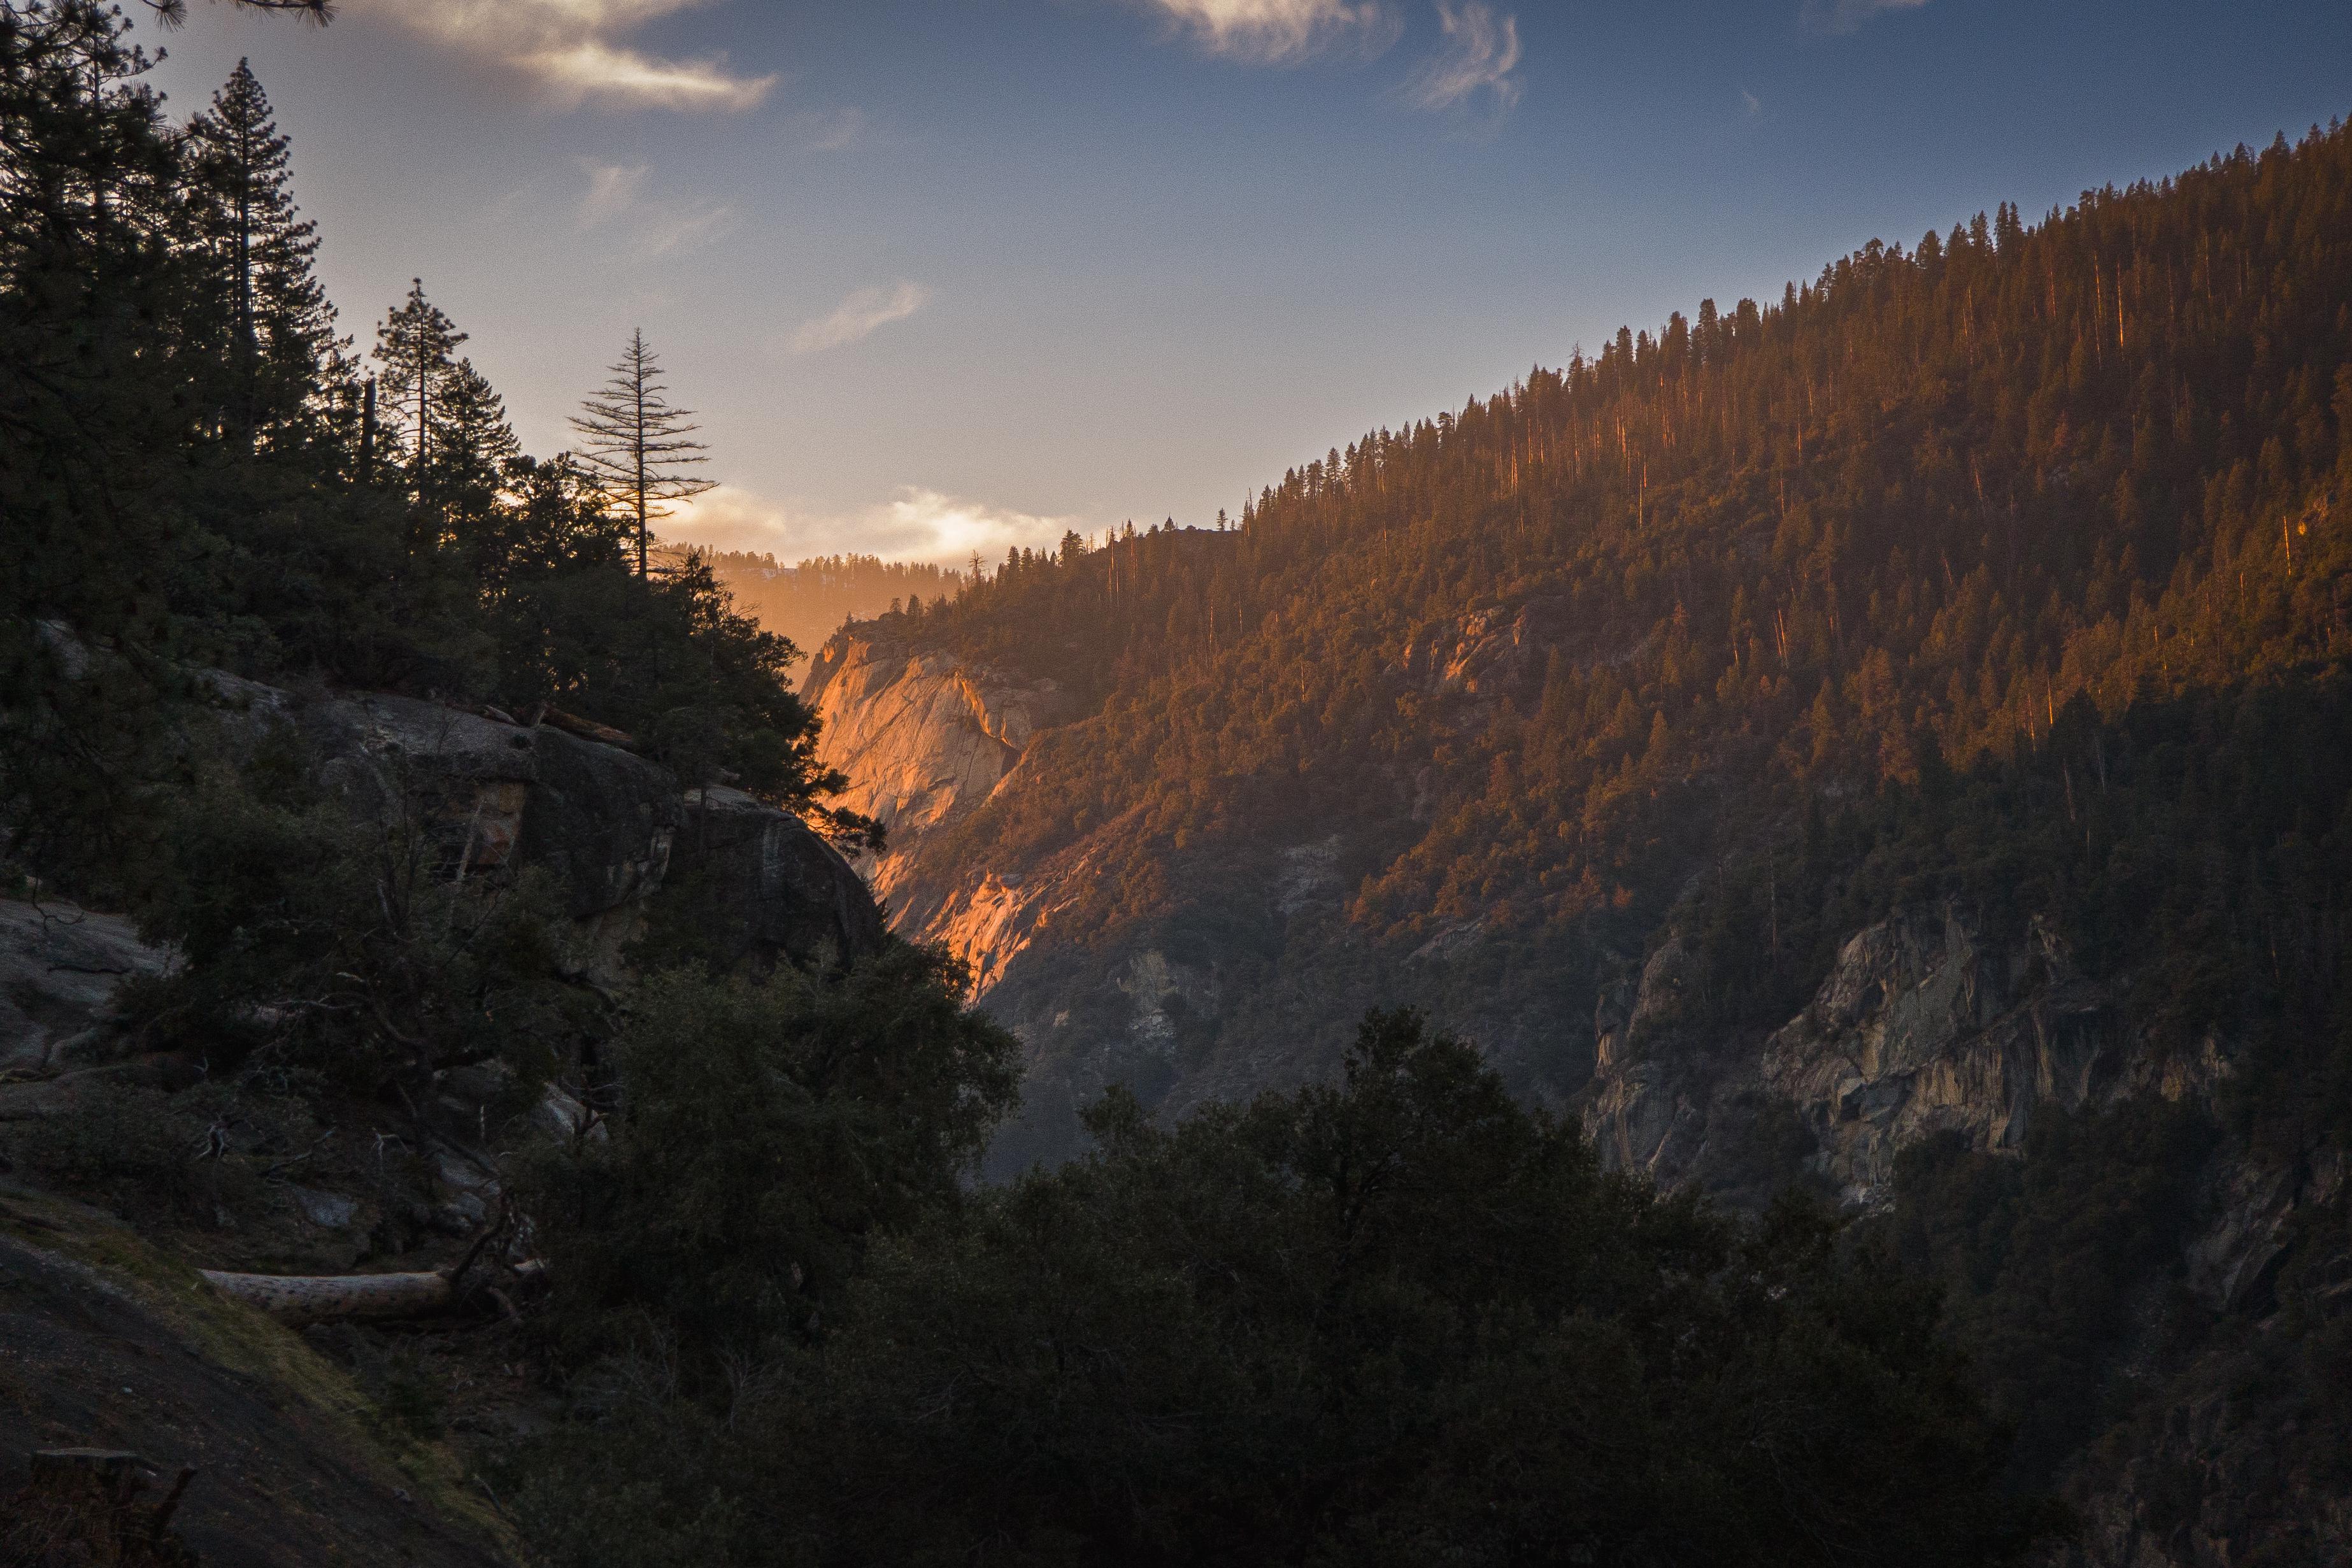 General 3693x2462 Yosemite National Park California USA valley forest cliff nature mountains landscape sunset